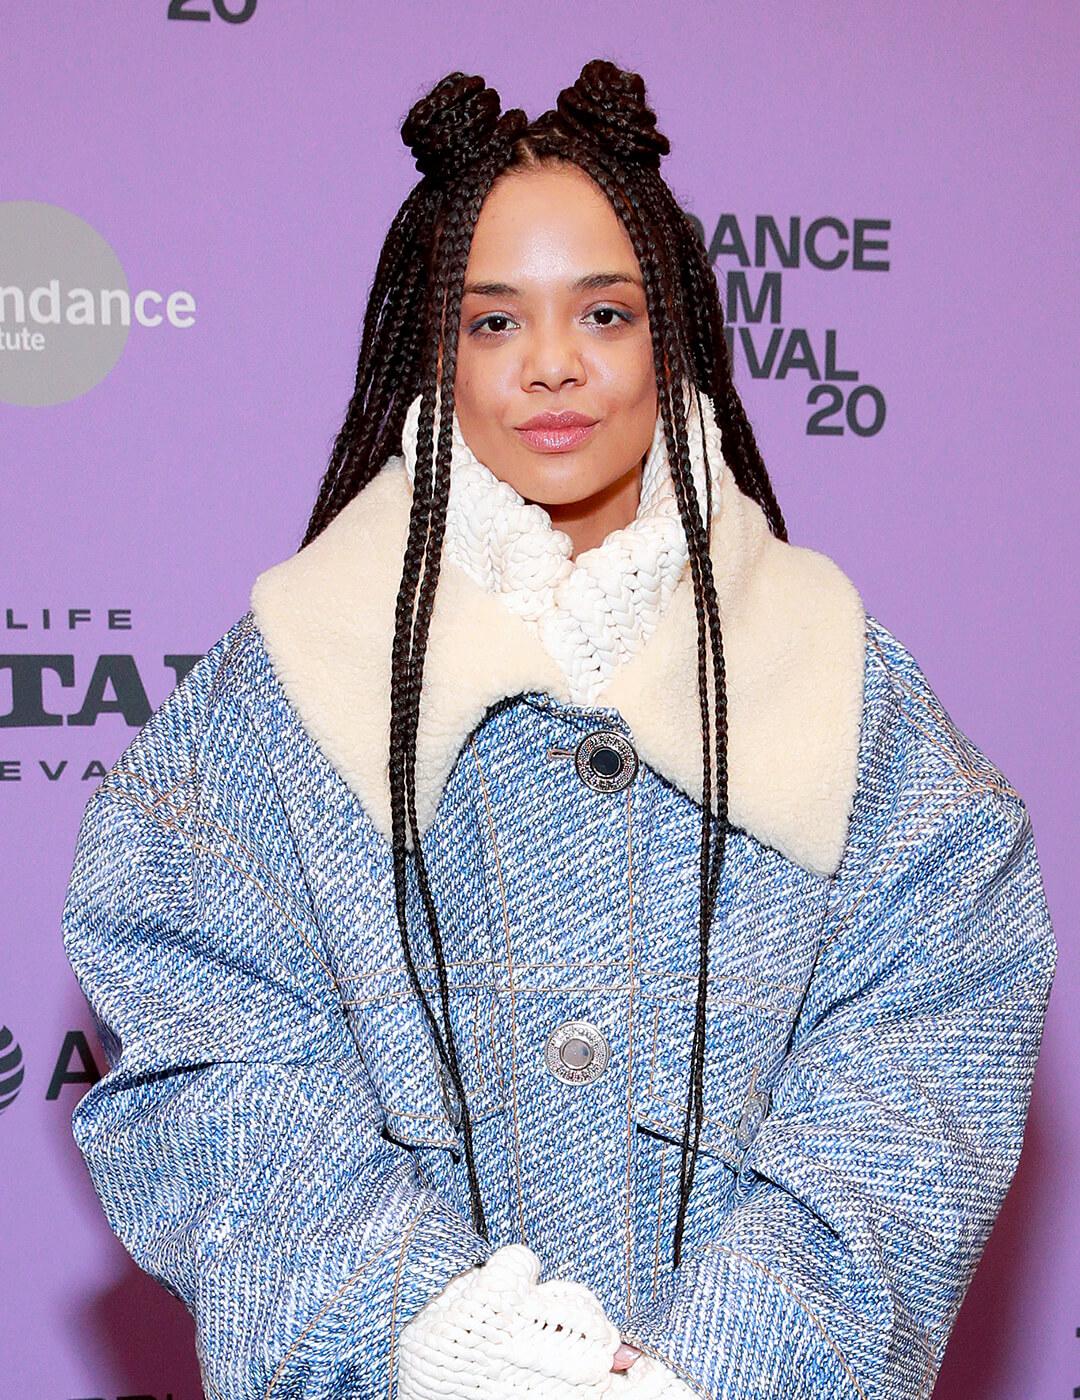 Tessa Thompson wearing a denim winter jacket and rocking a braided hairstyle with space buns